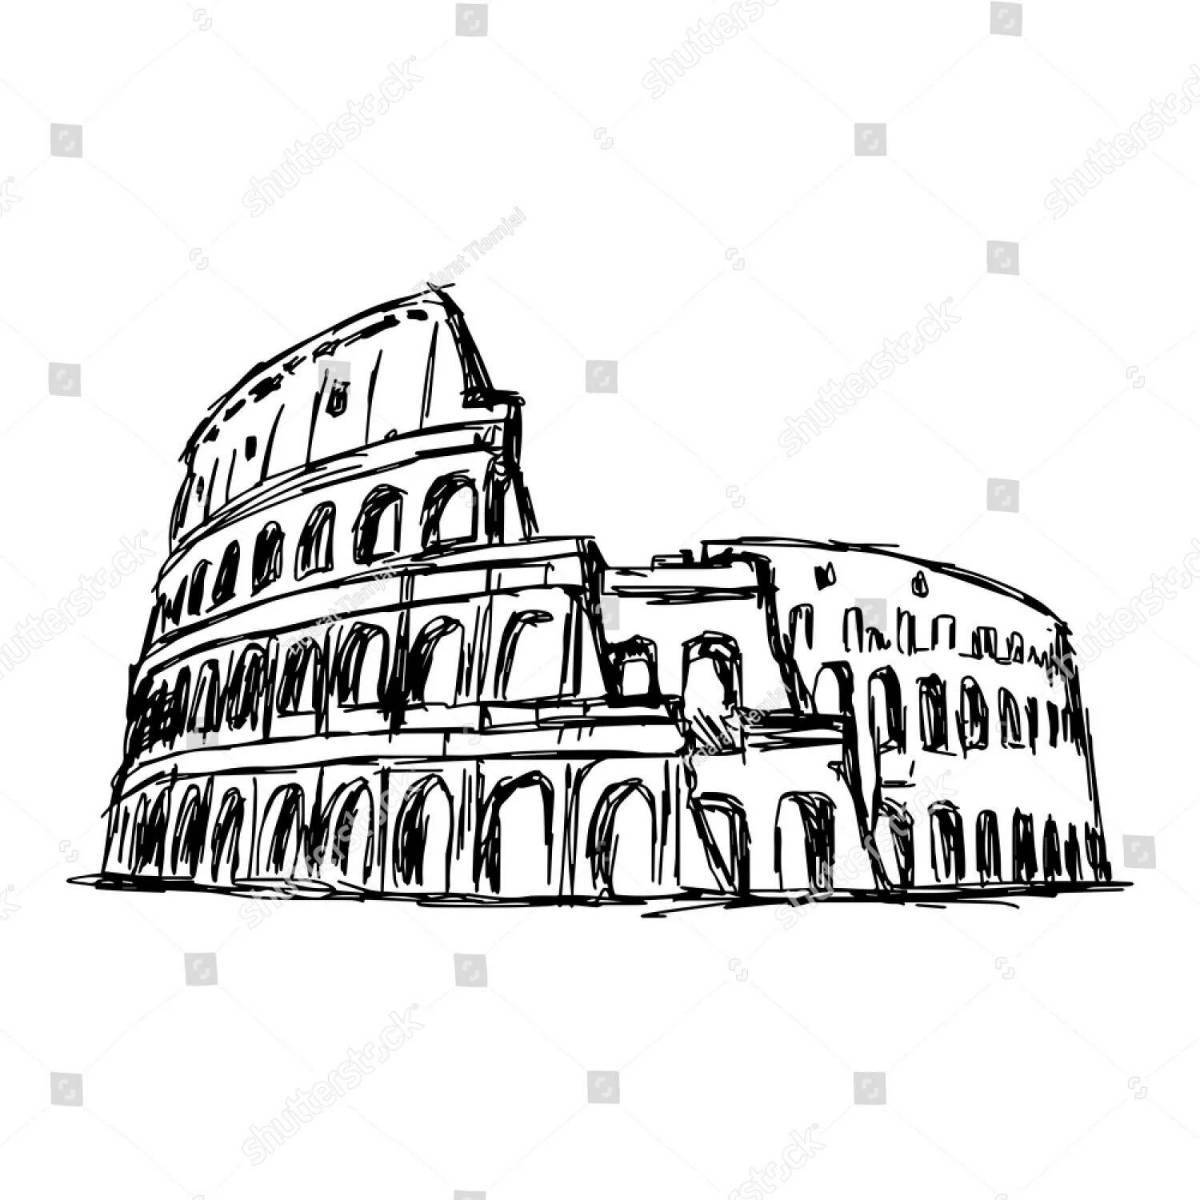 Coloring book shining colosseum for kids